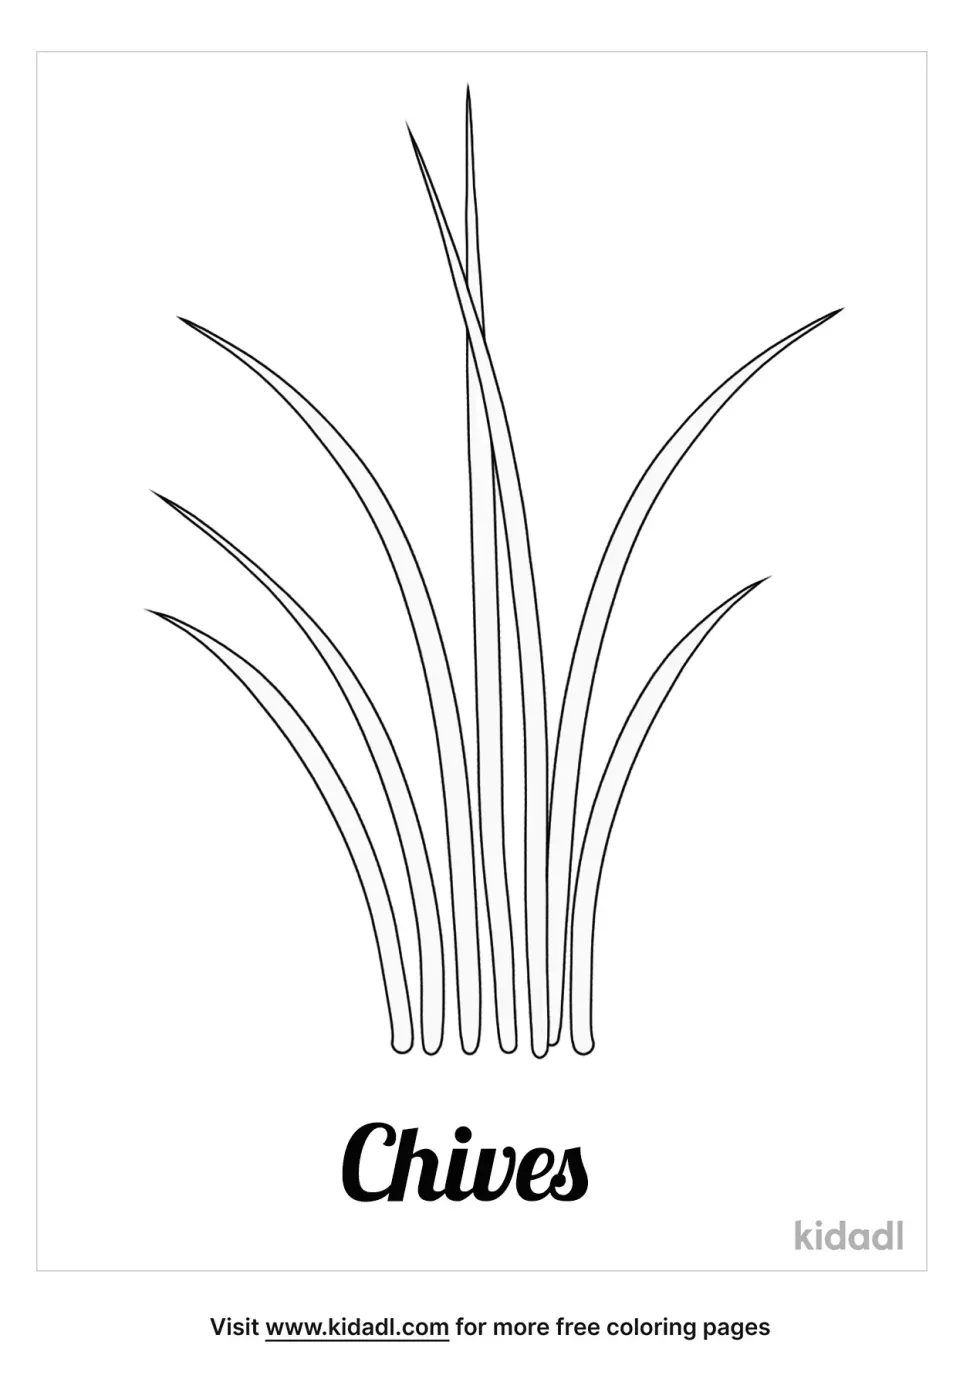 Chives Coloring Page